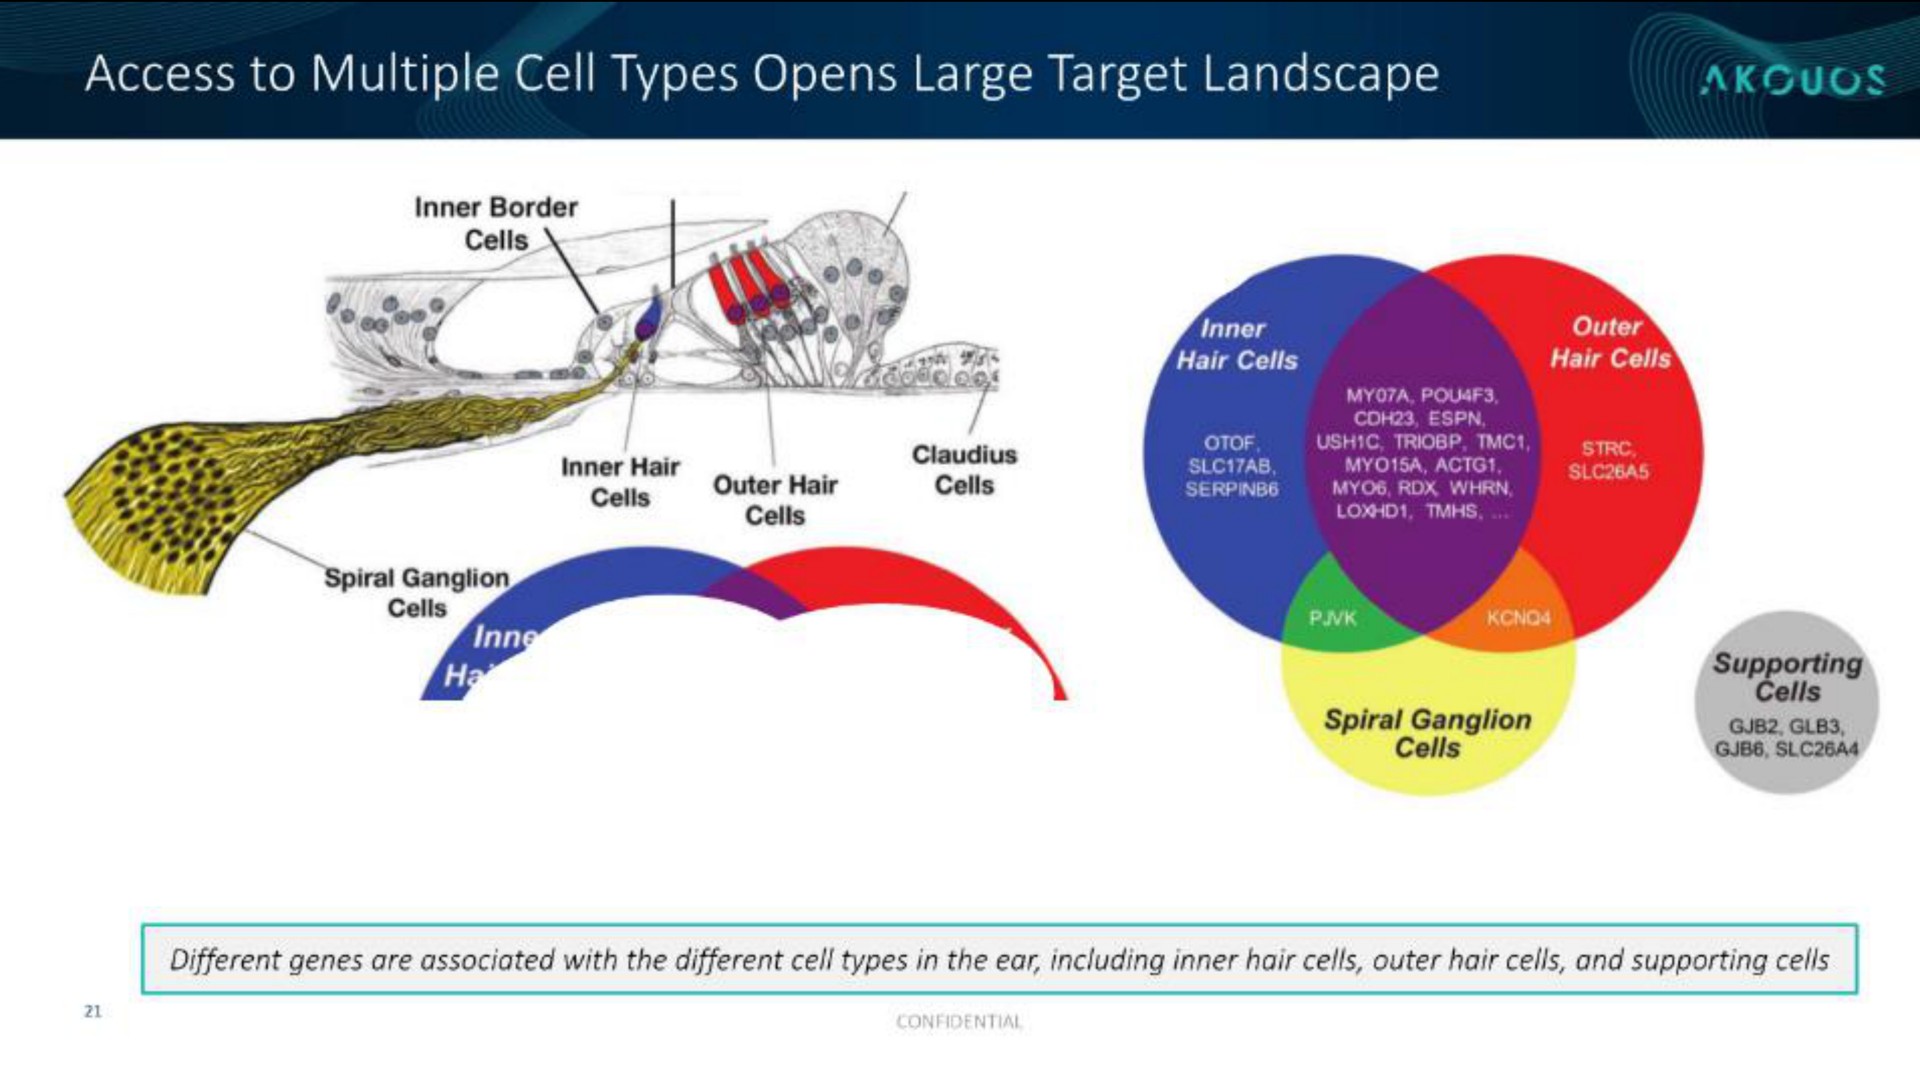 access to multiple cell types opens large target landscape | Akouos